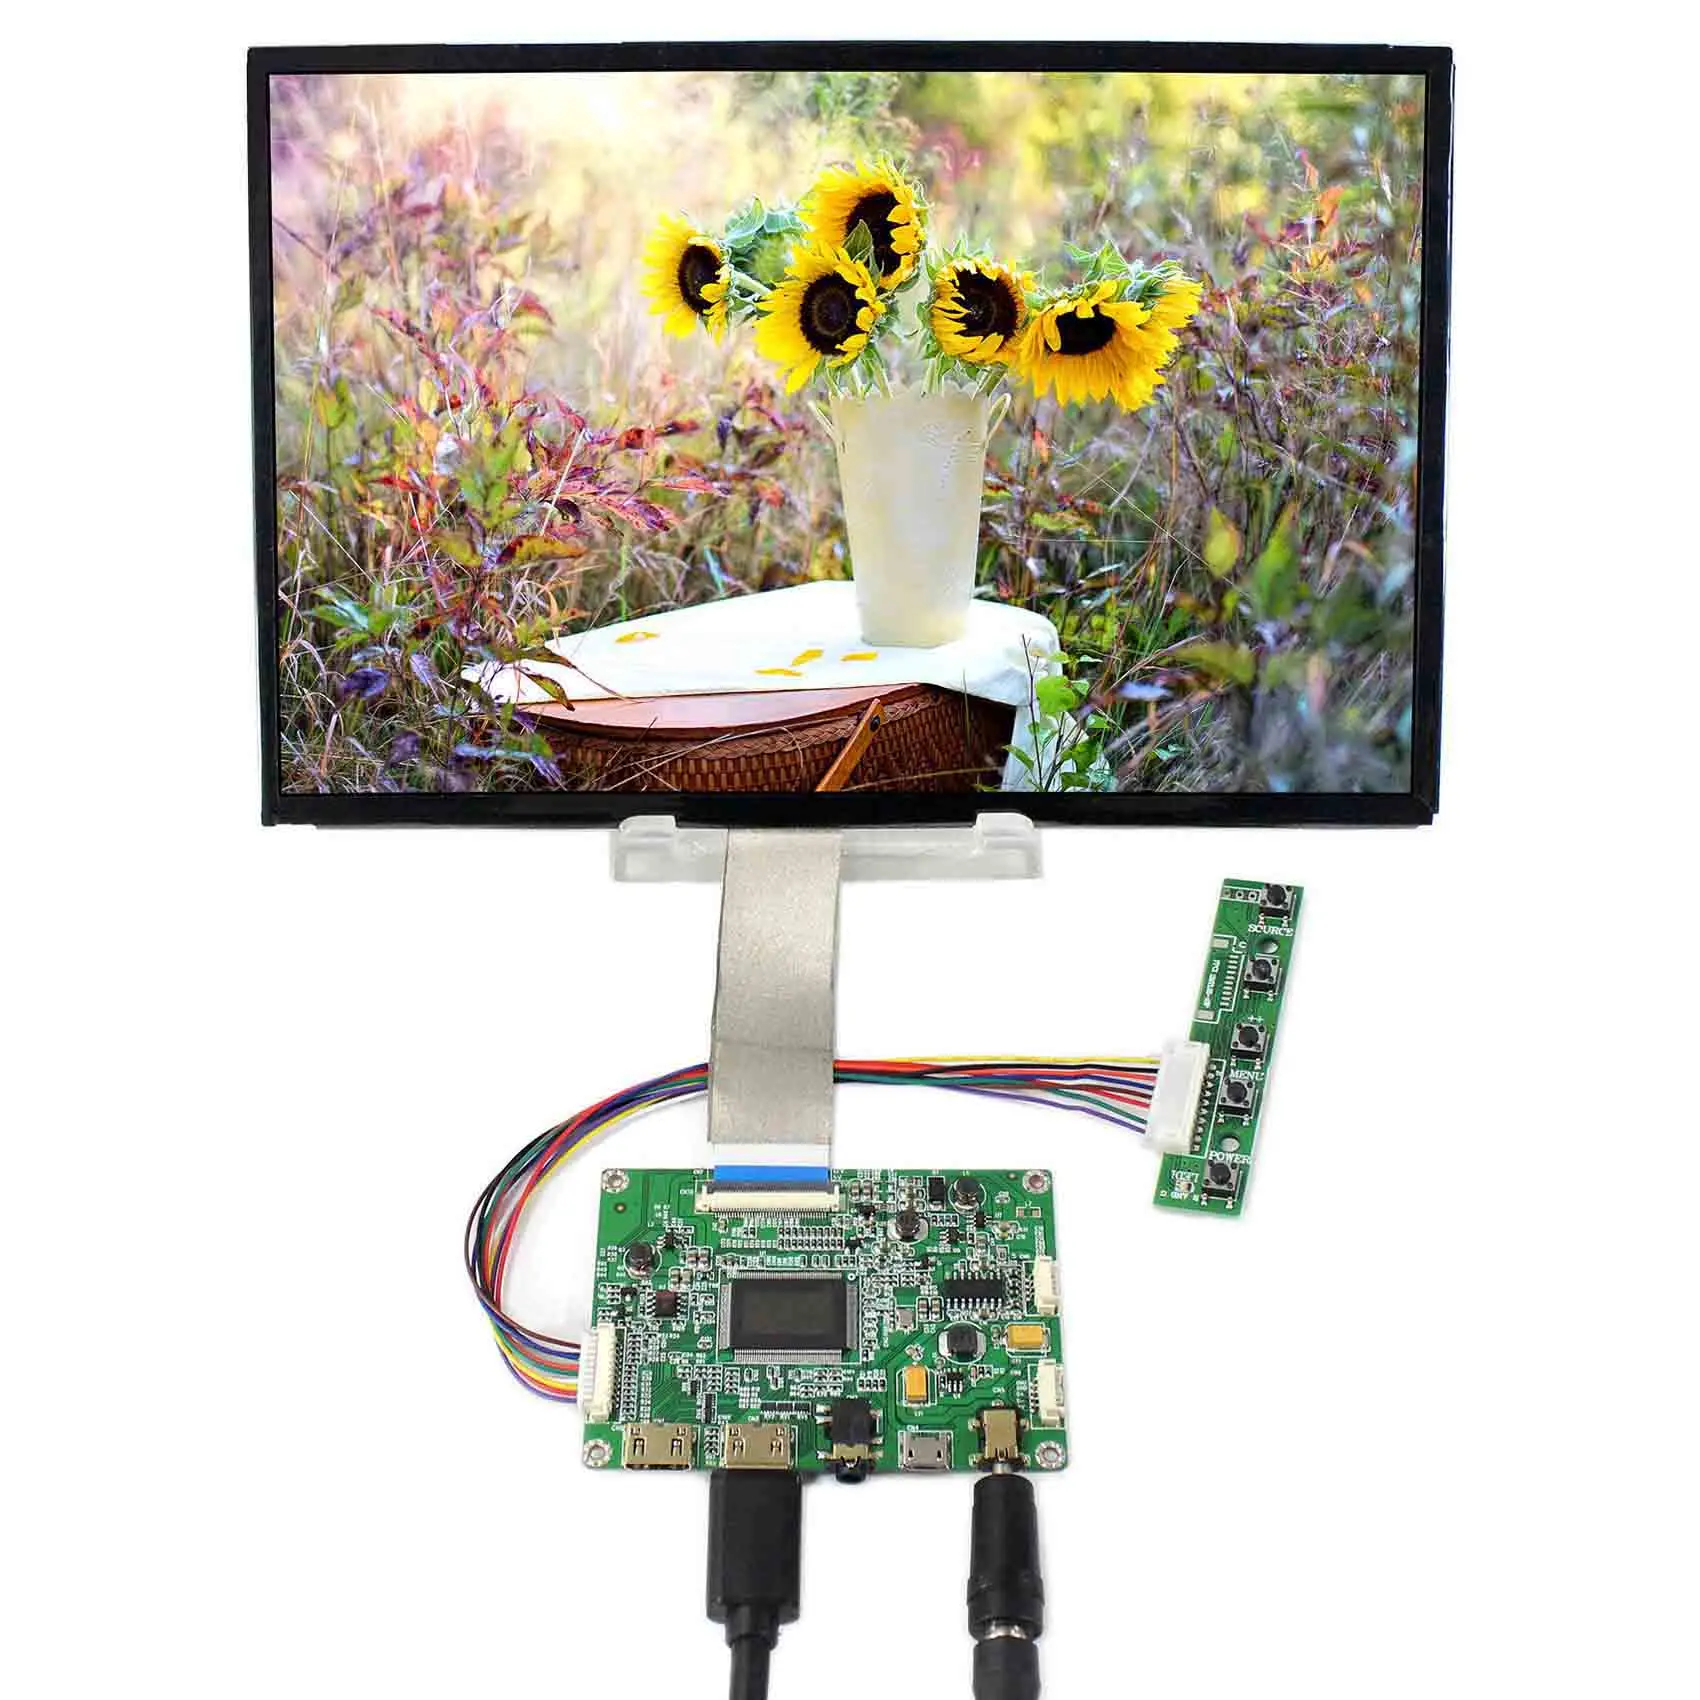 

10.1inch VVX10T025J00 2560X1600 IPS eDP 40pins LCD Screen Full Viewing Angle Brightness 400nit with HD MI LCD Controller Board